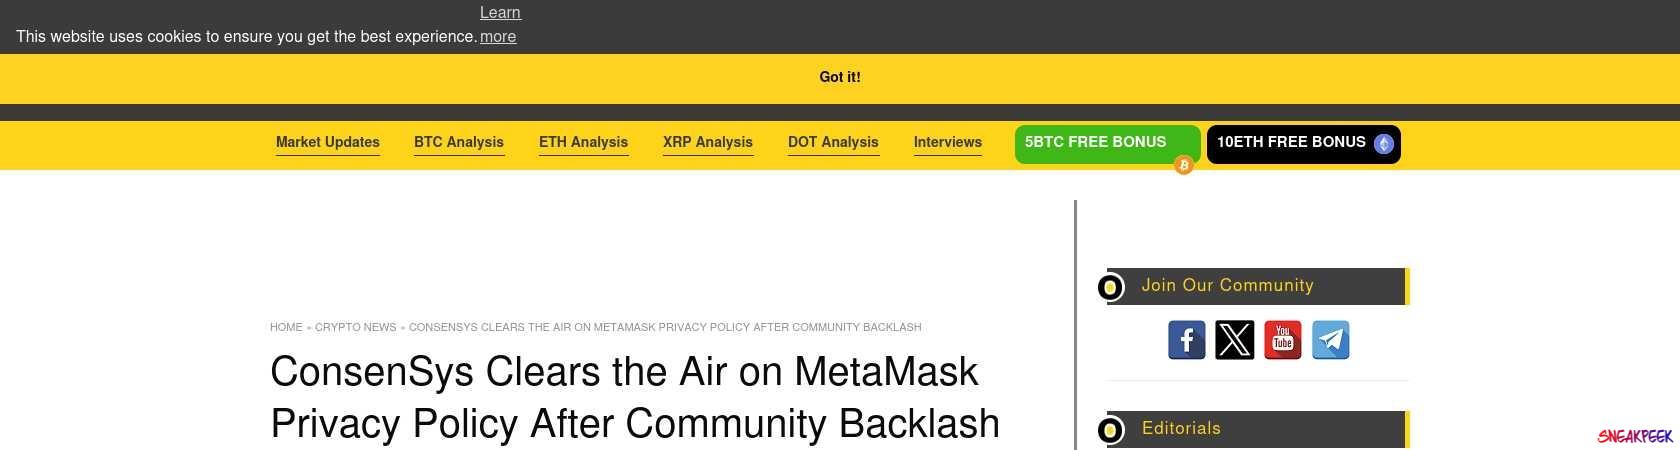 Read the full Article:  ⭲ ConsenSys Clears the Air on MetaMask Privacy Policy After Community Backlash